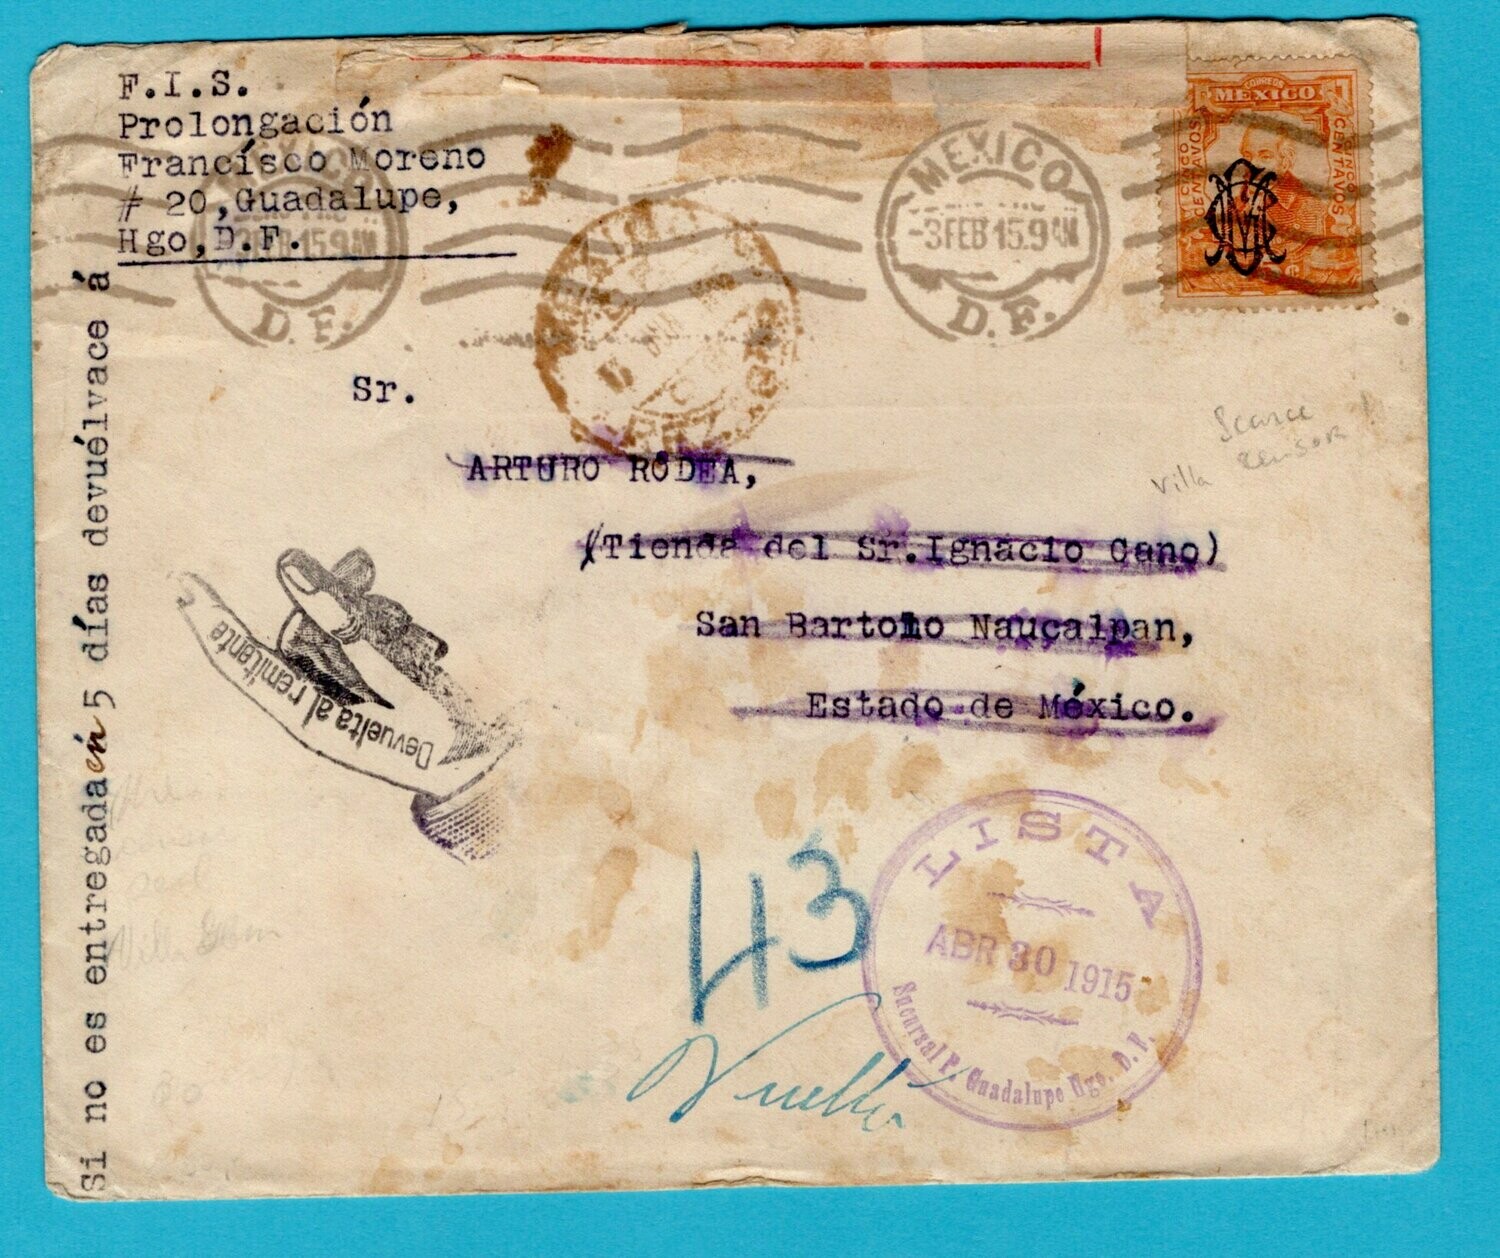 MEXICO censor cover 1915 Guadelupe to San Bartolo and returned